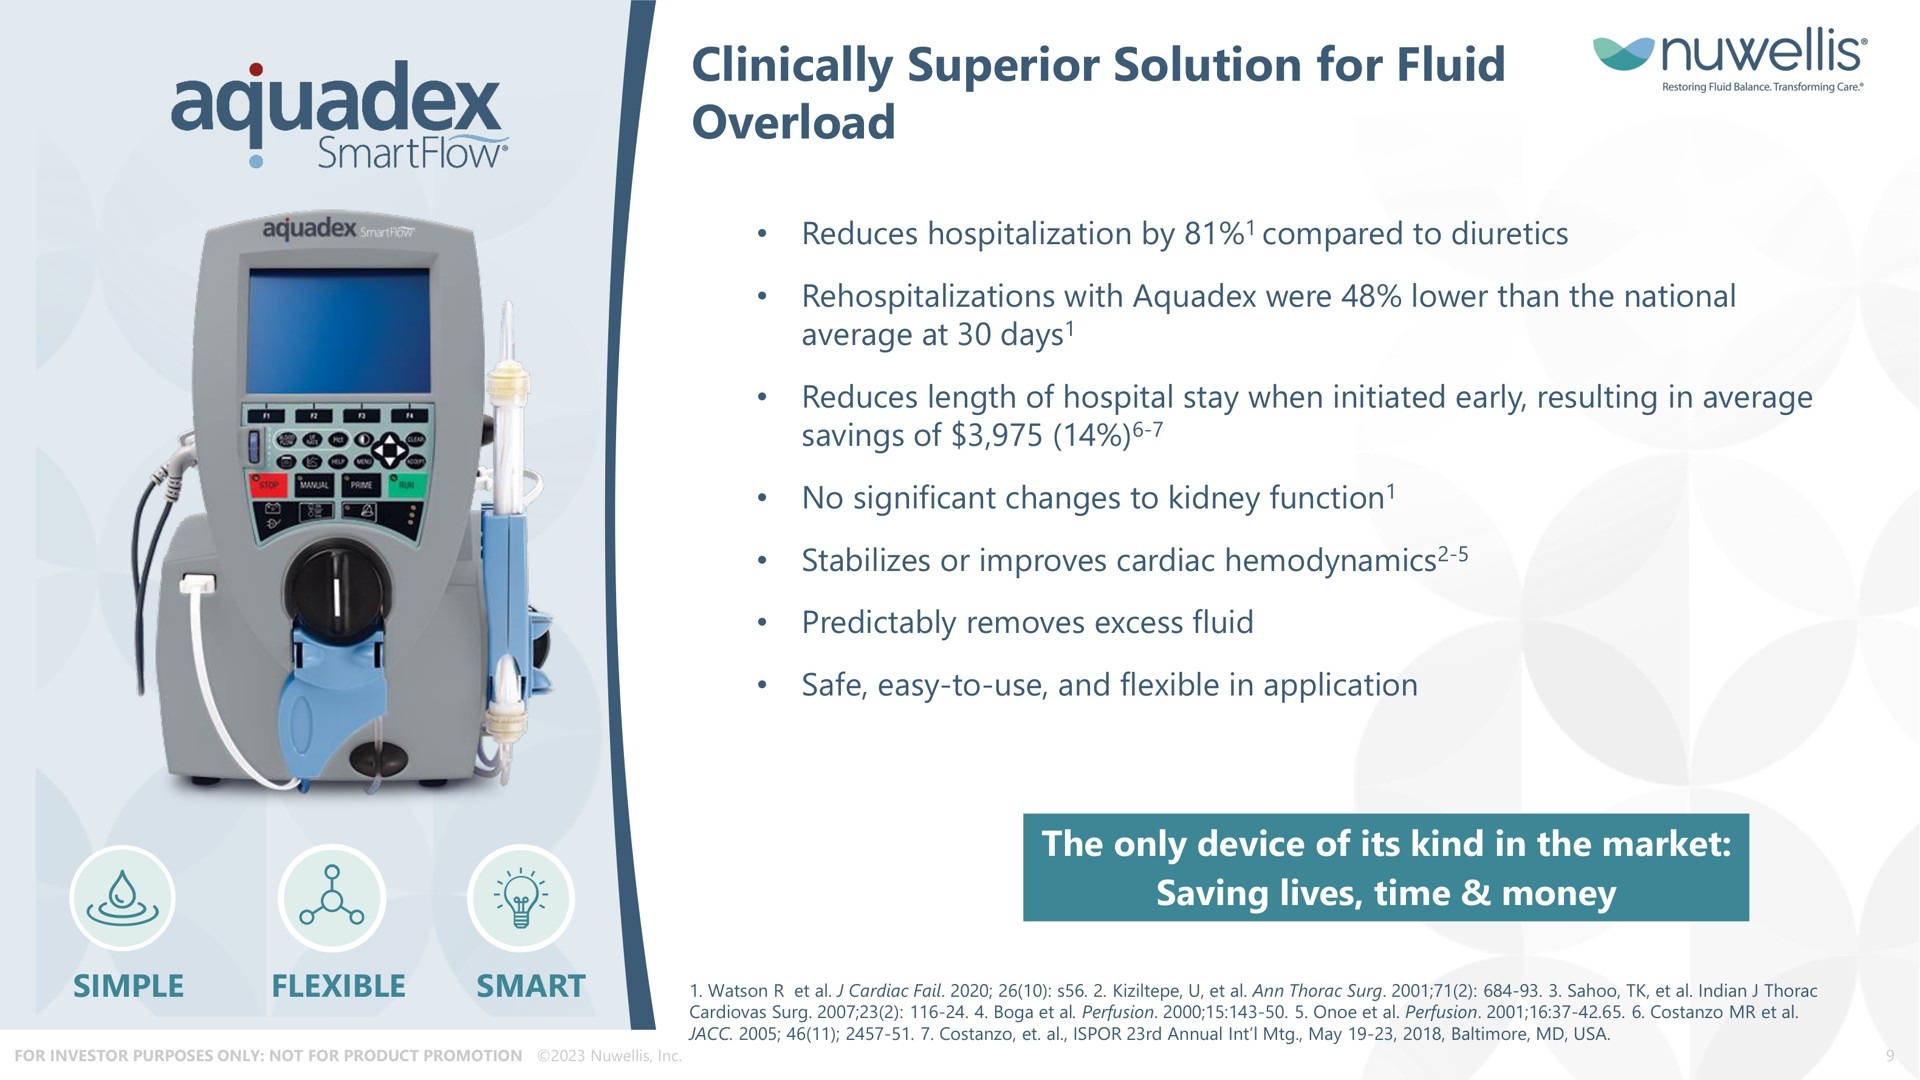 clinically superior solution for fluid overload saving lives time money | Nuwellis